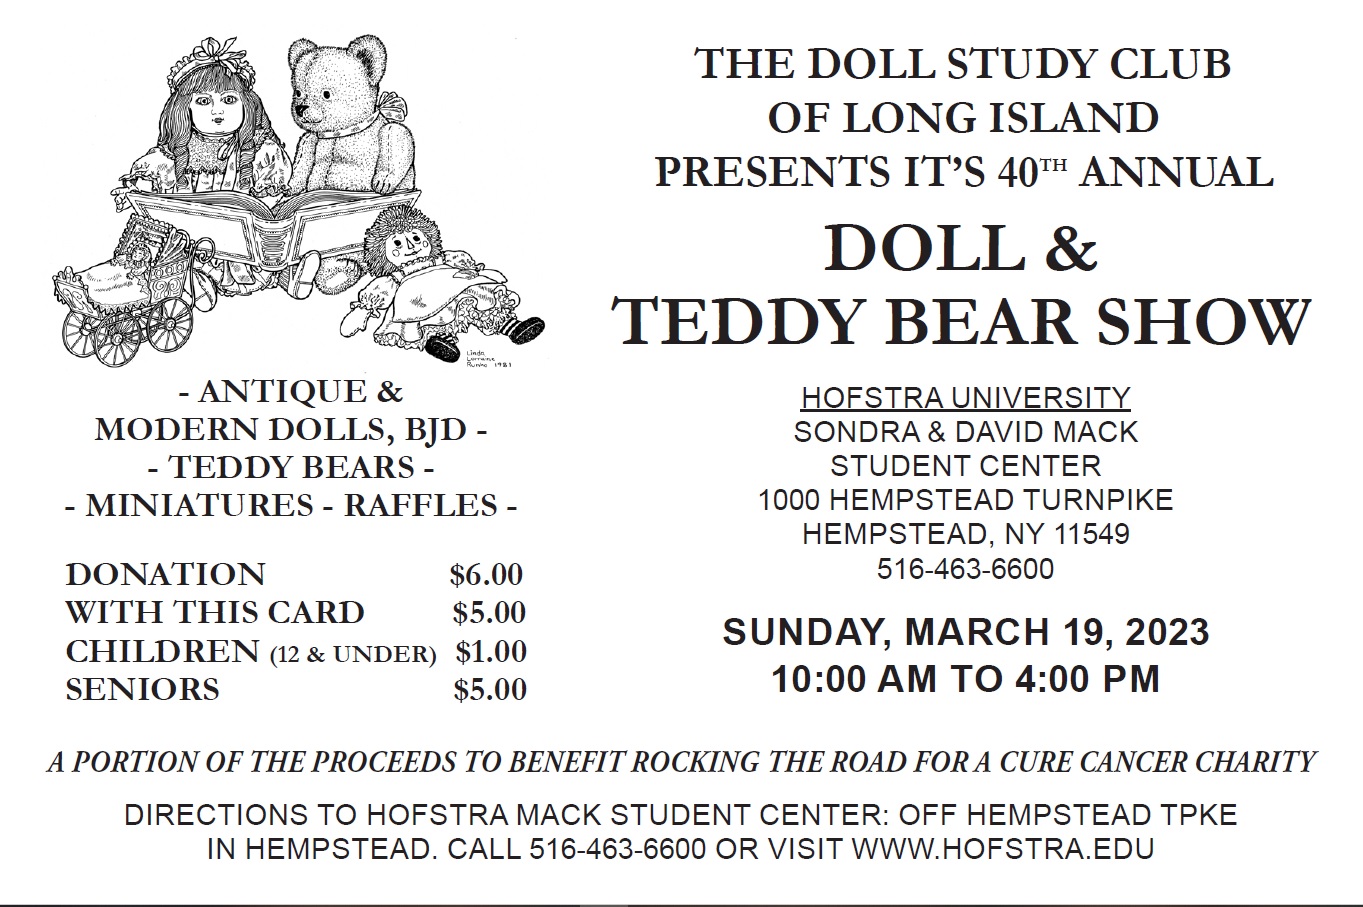 The Doll Study Club of Long Island presents its 40th annual doll and teddy bear show at the Hofstra University Student Center 1000 Hempstead Turnpike, Hempstead, NY 11549 on Sunday, March 19th, 2023 from 10 am to 4 pm